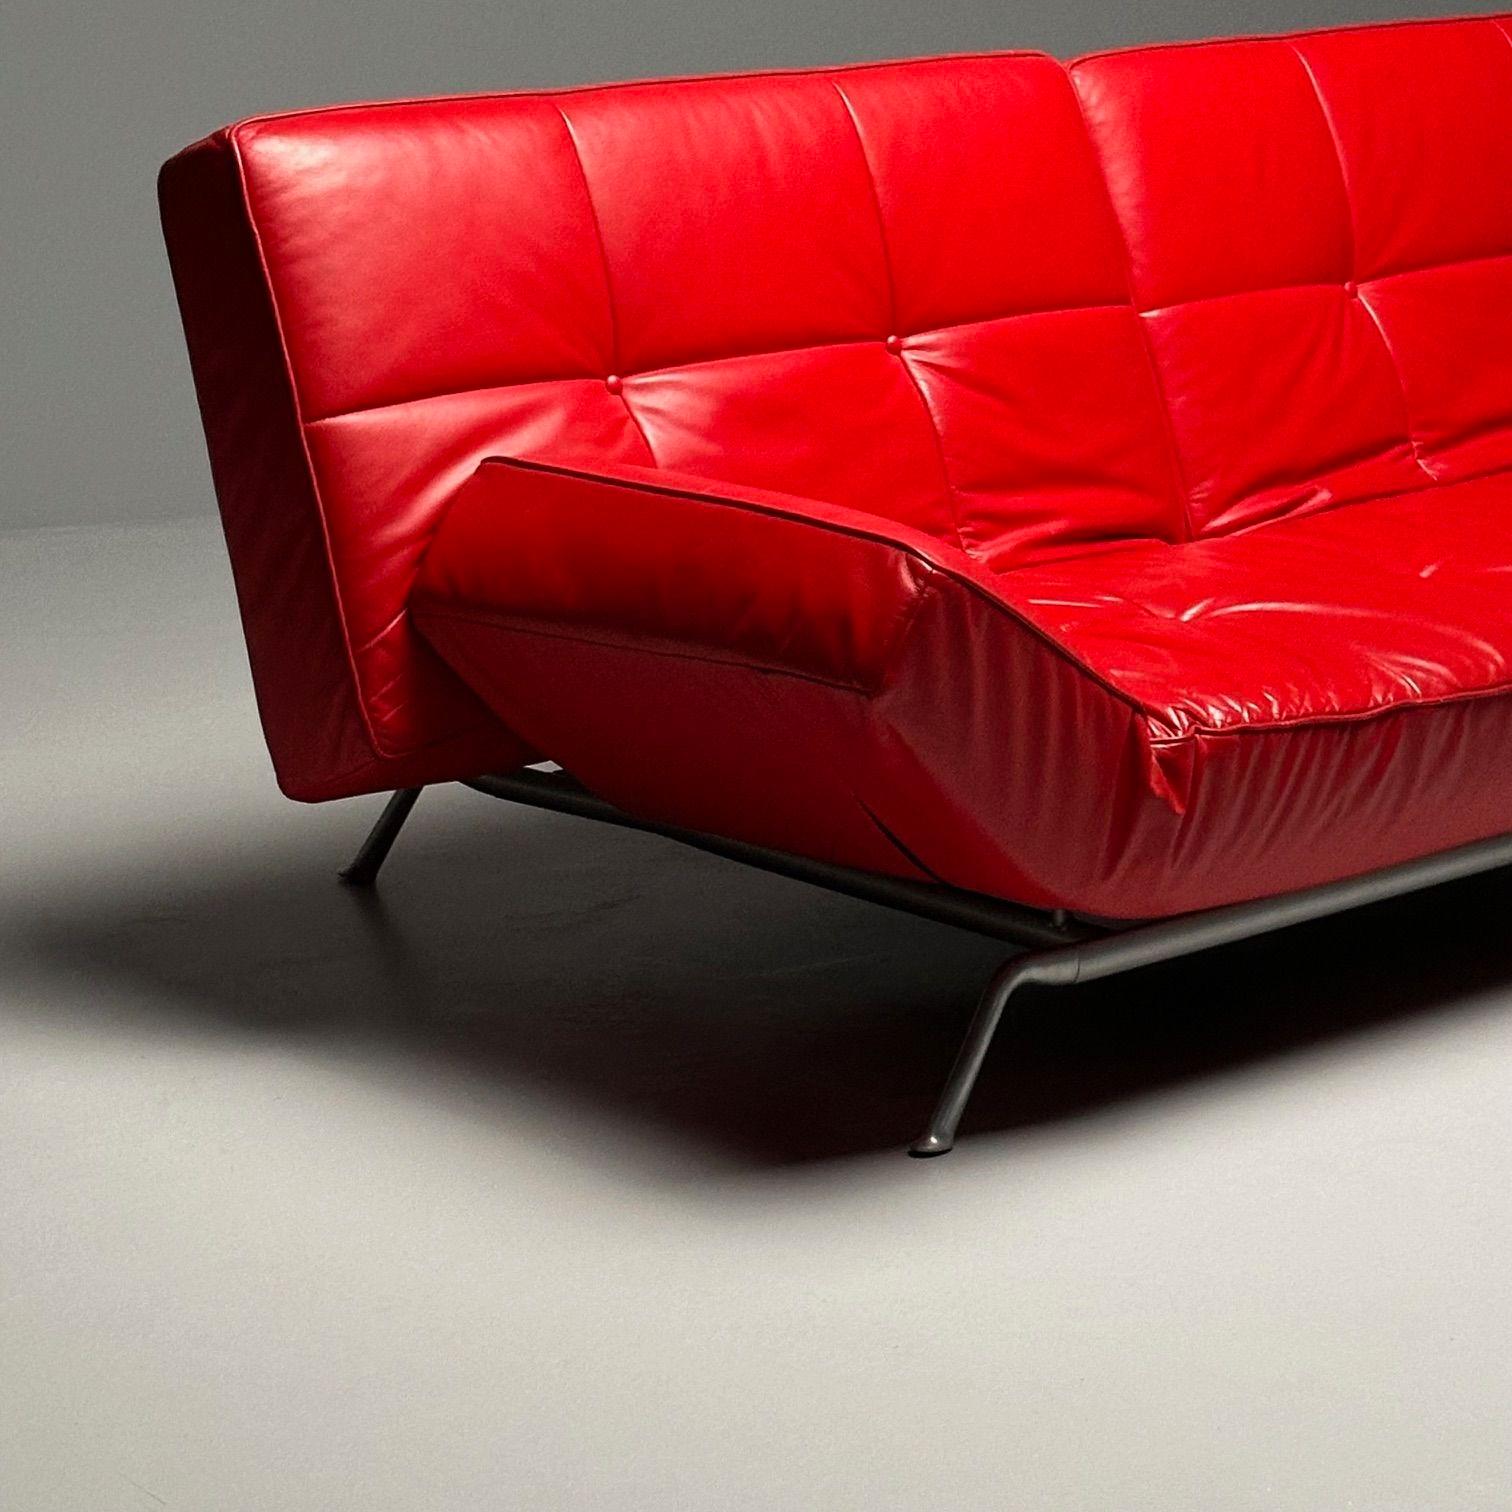 Pascal Mourgue, Ligne Roset, Smala Adjustable Daybed, Sofa, Red Leather, France 8